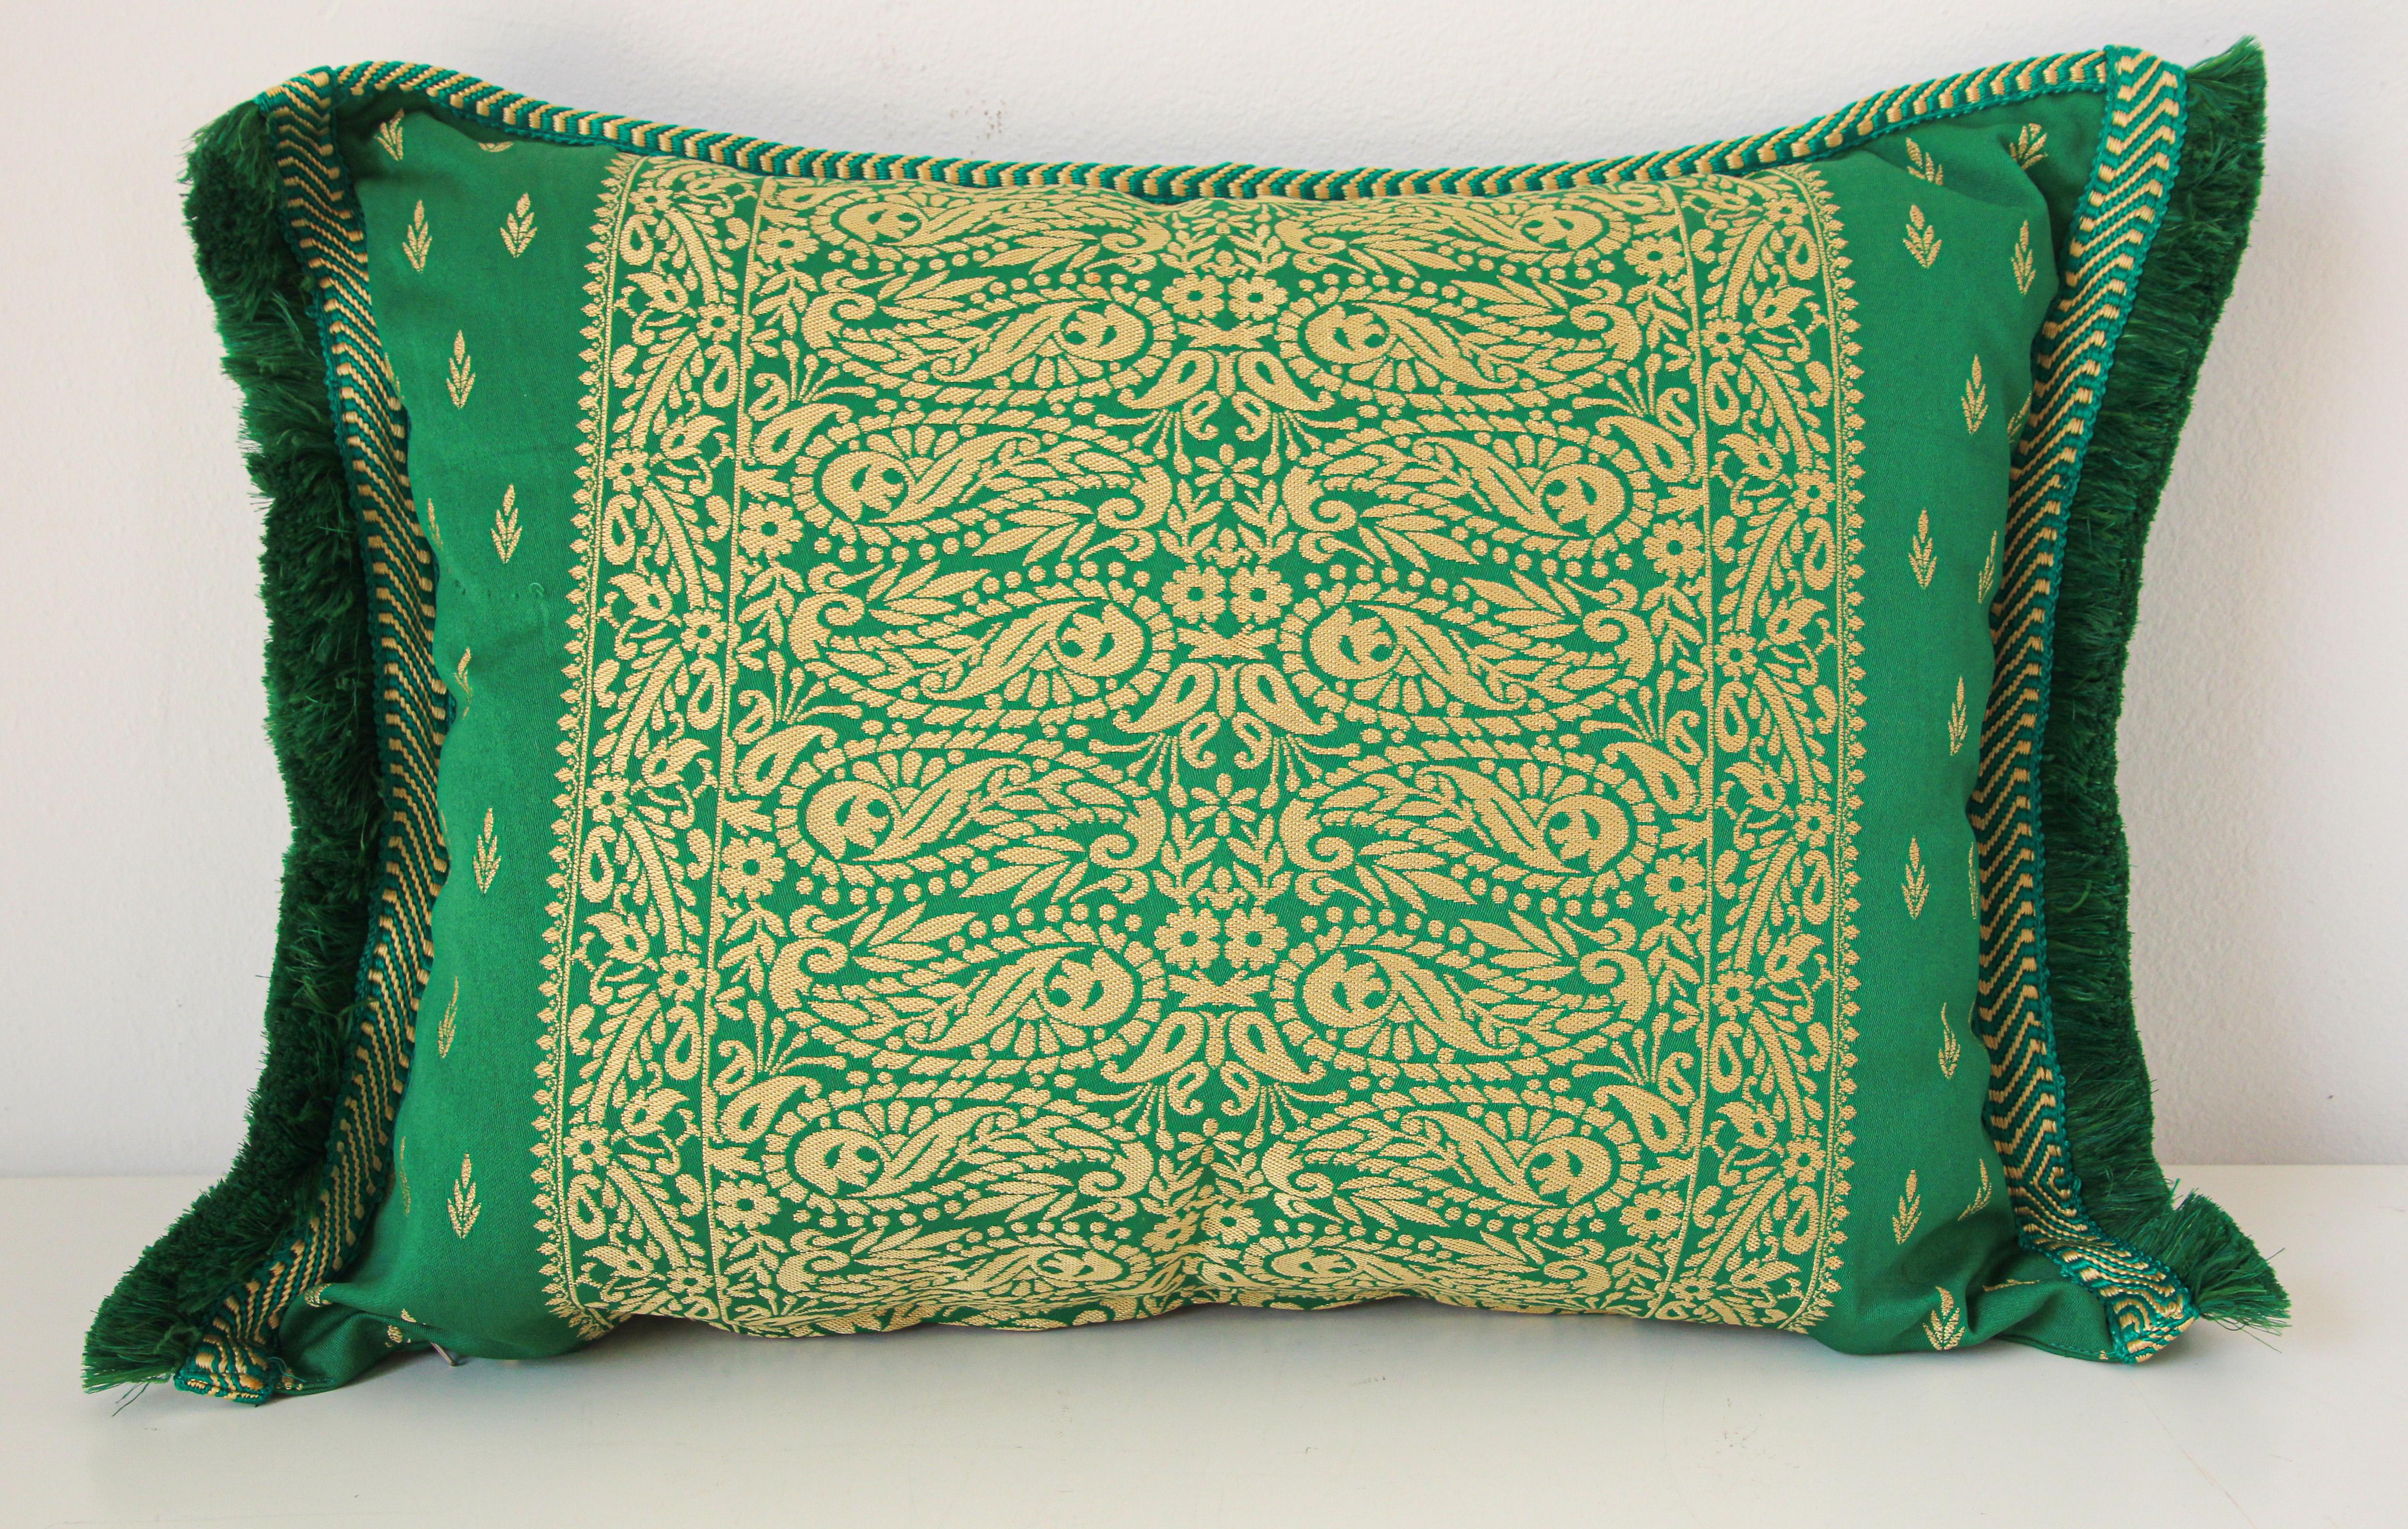 Large Moroccan damask green floral bolster lumbar decorative pillow.
Great to use as accent pillows on a bed or sofa throw pillows.
Pillow has a beautiful center medallion, detailed corners, fringe edges trim.
Bohemian Moorish Venetian stylish